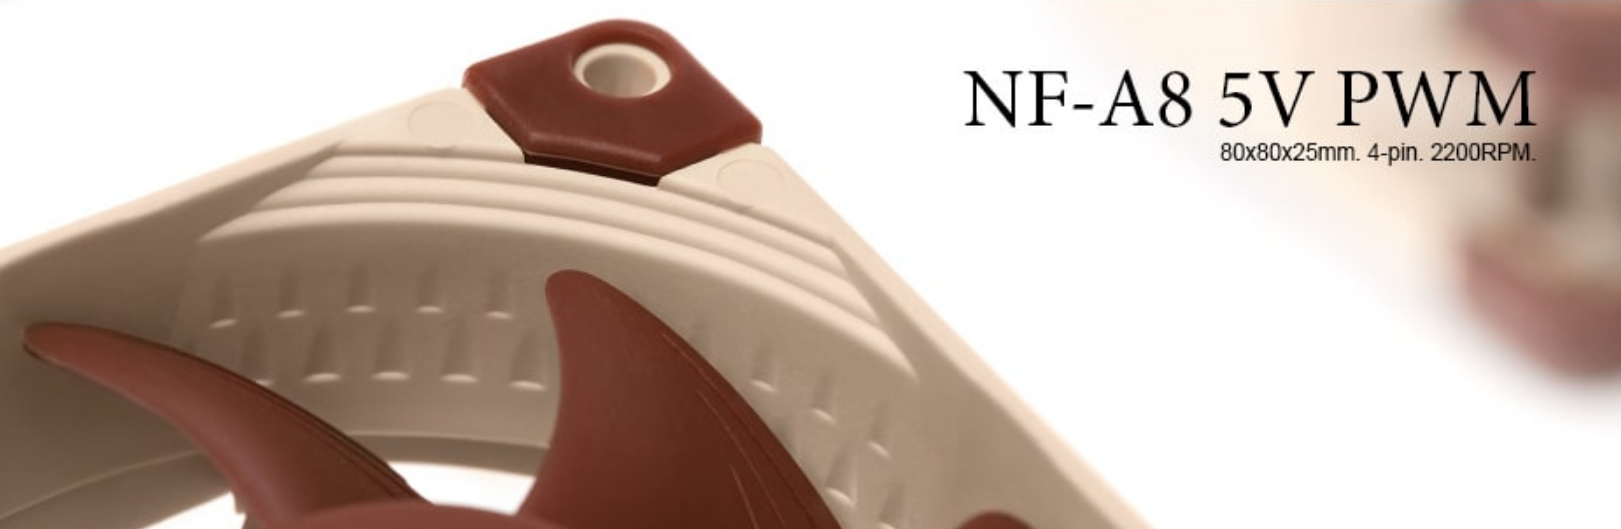 A large marketing image providing additional information about the product Noctua NF-A8 5V PWM 80mm x 25mm 2200RPM Cooling Fan - Additional alt info not provided